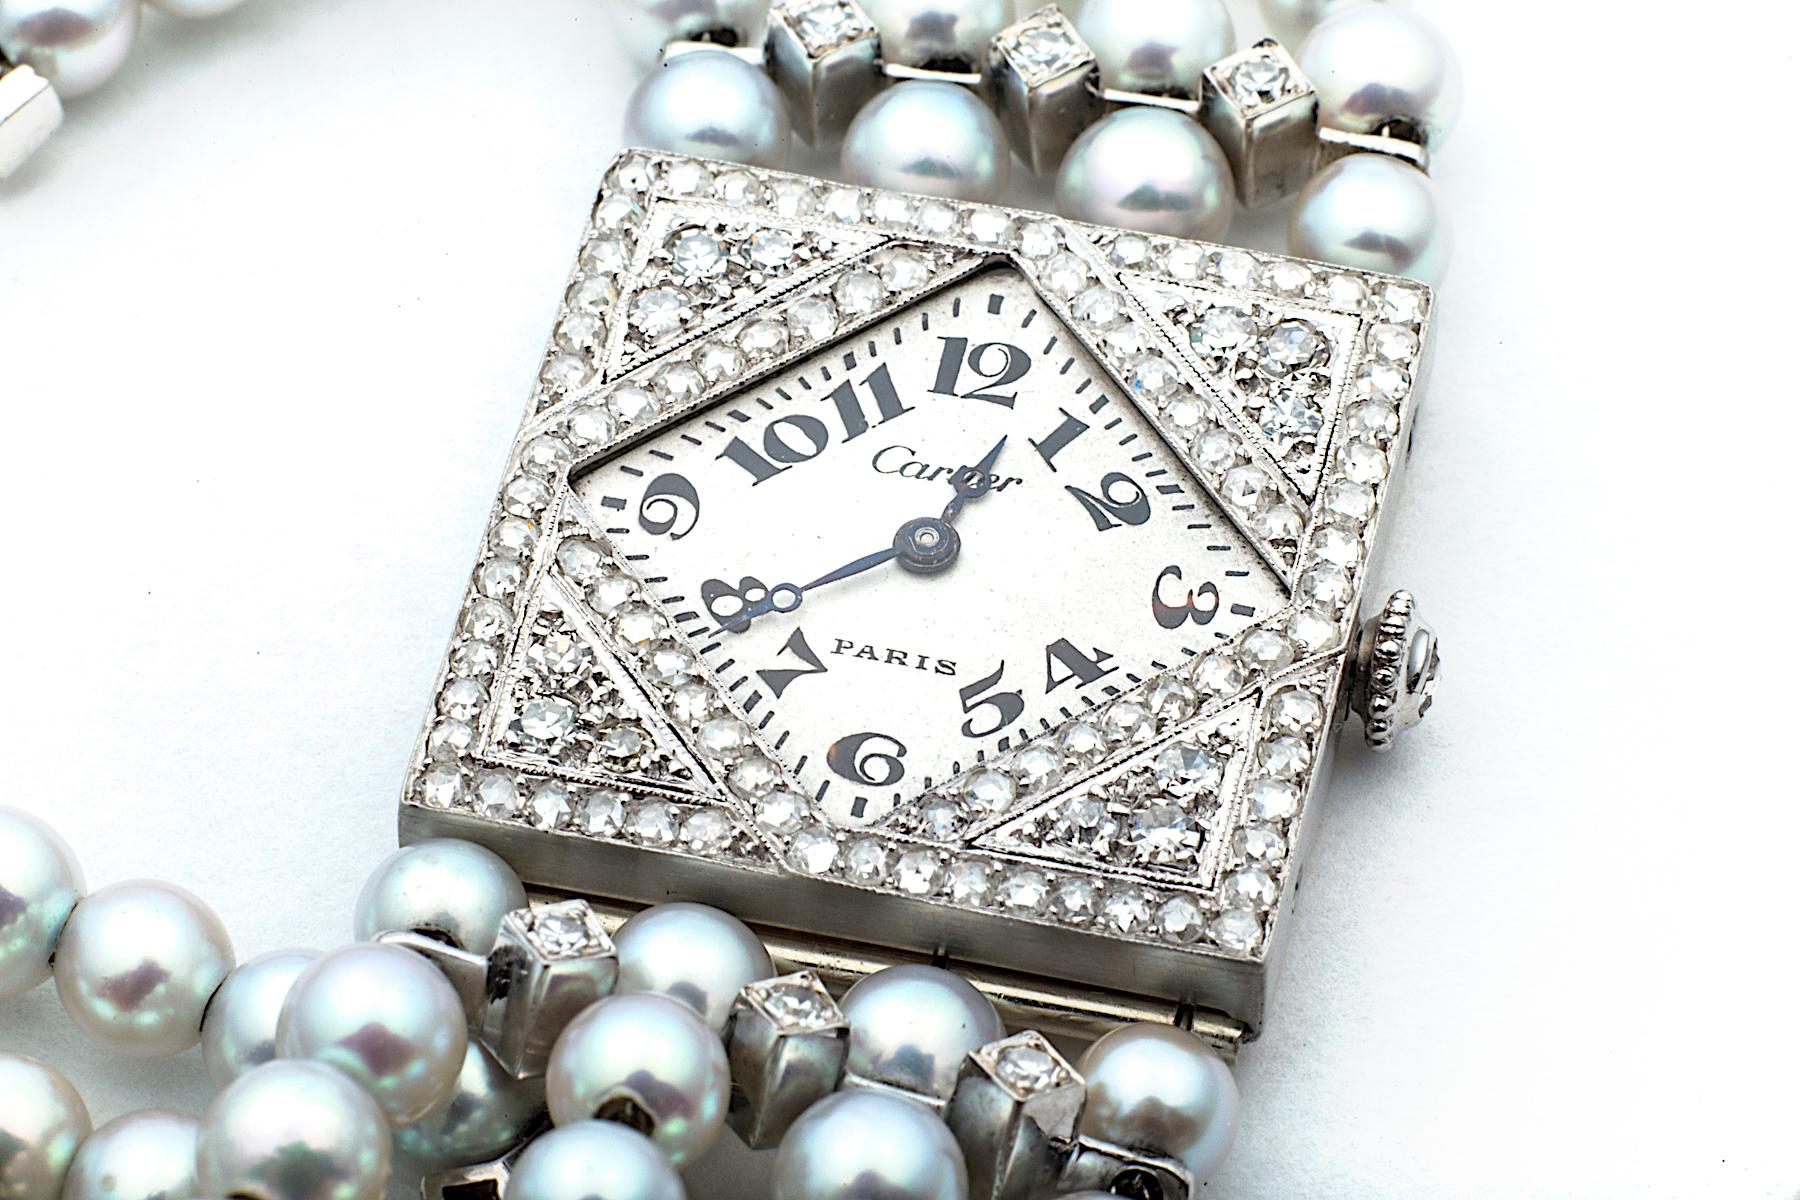 Diamonds and pearls are among the rarest things in the world and this extraordinary Art Deco, circa 1915-1920, wristwatch magically marries the two.  Owned to Mamie Eisenhower, wife of Dwight D. Eisenhower the 34th President of the US, this Cartier